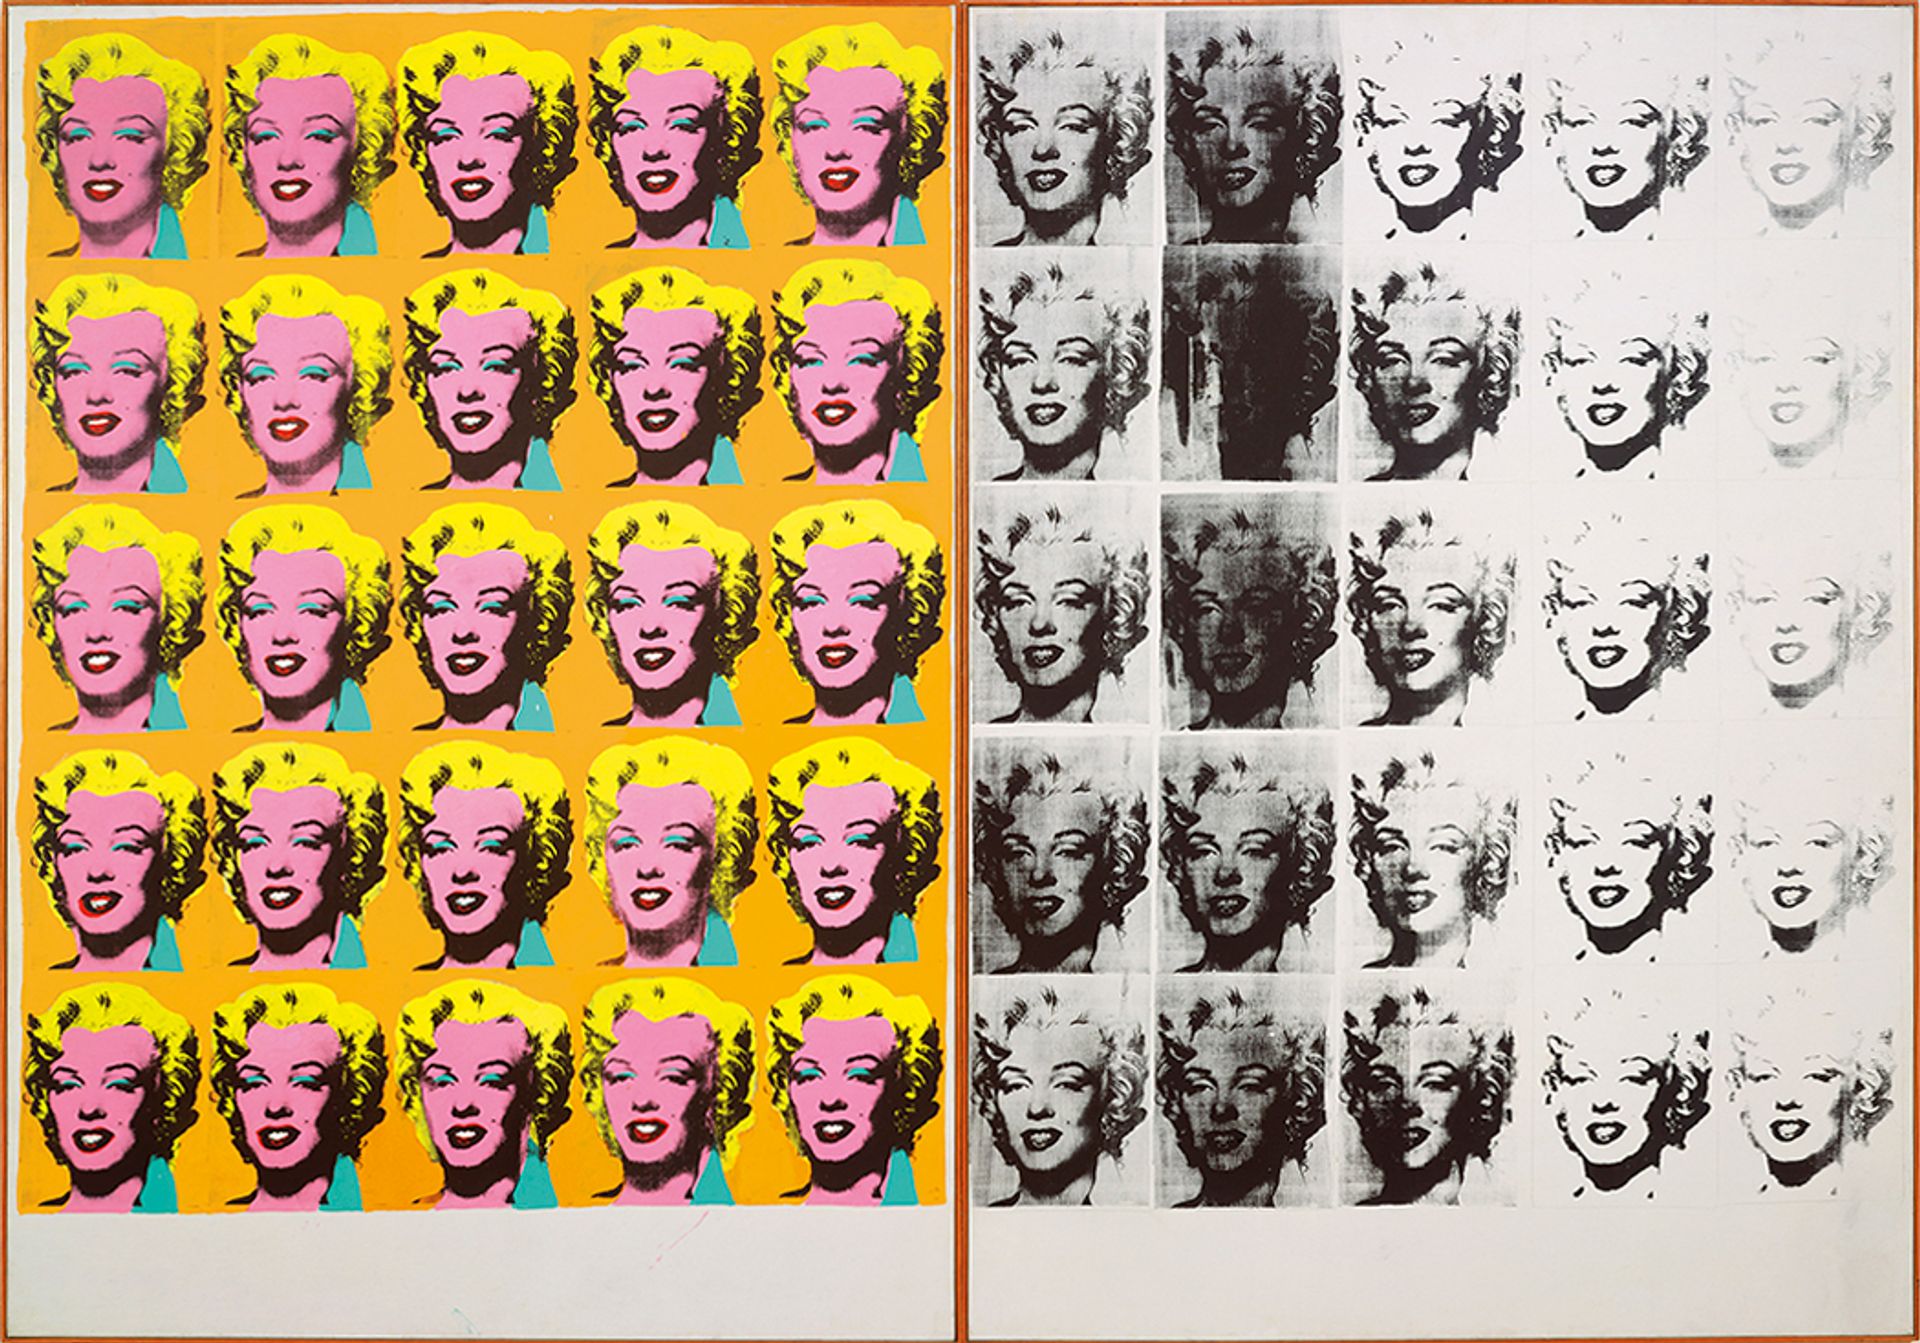 Andy Warhol's Marilyn Diptych (1962) Tate, London; purchased 1980 © The Andy Warhol Foundation for the Visual Arts, Inc. / Artists Rights Society (ARS) New York